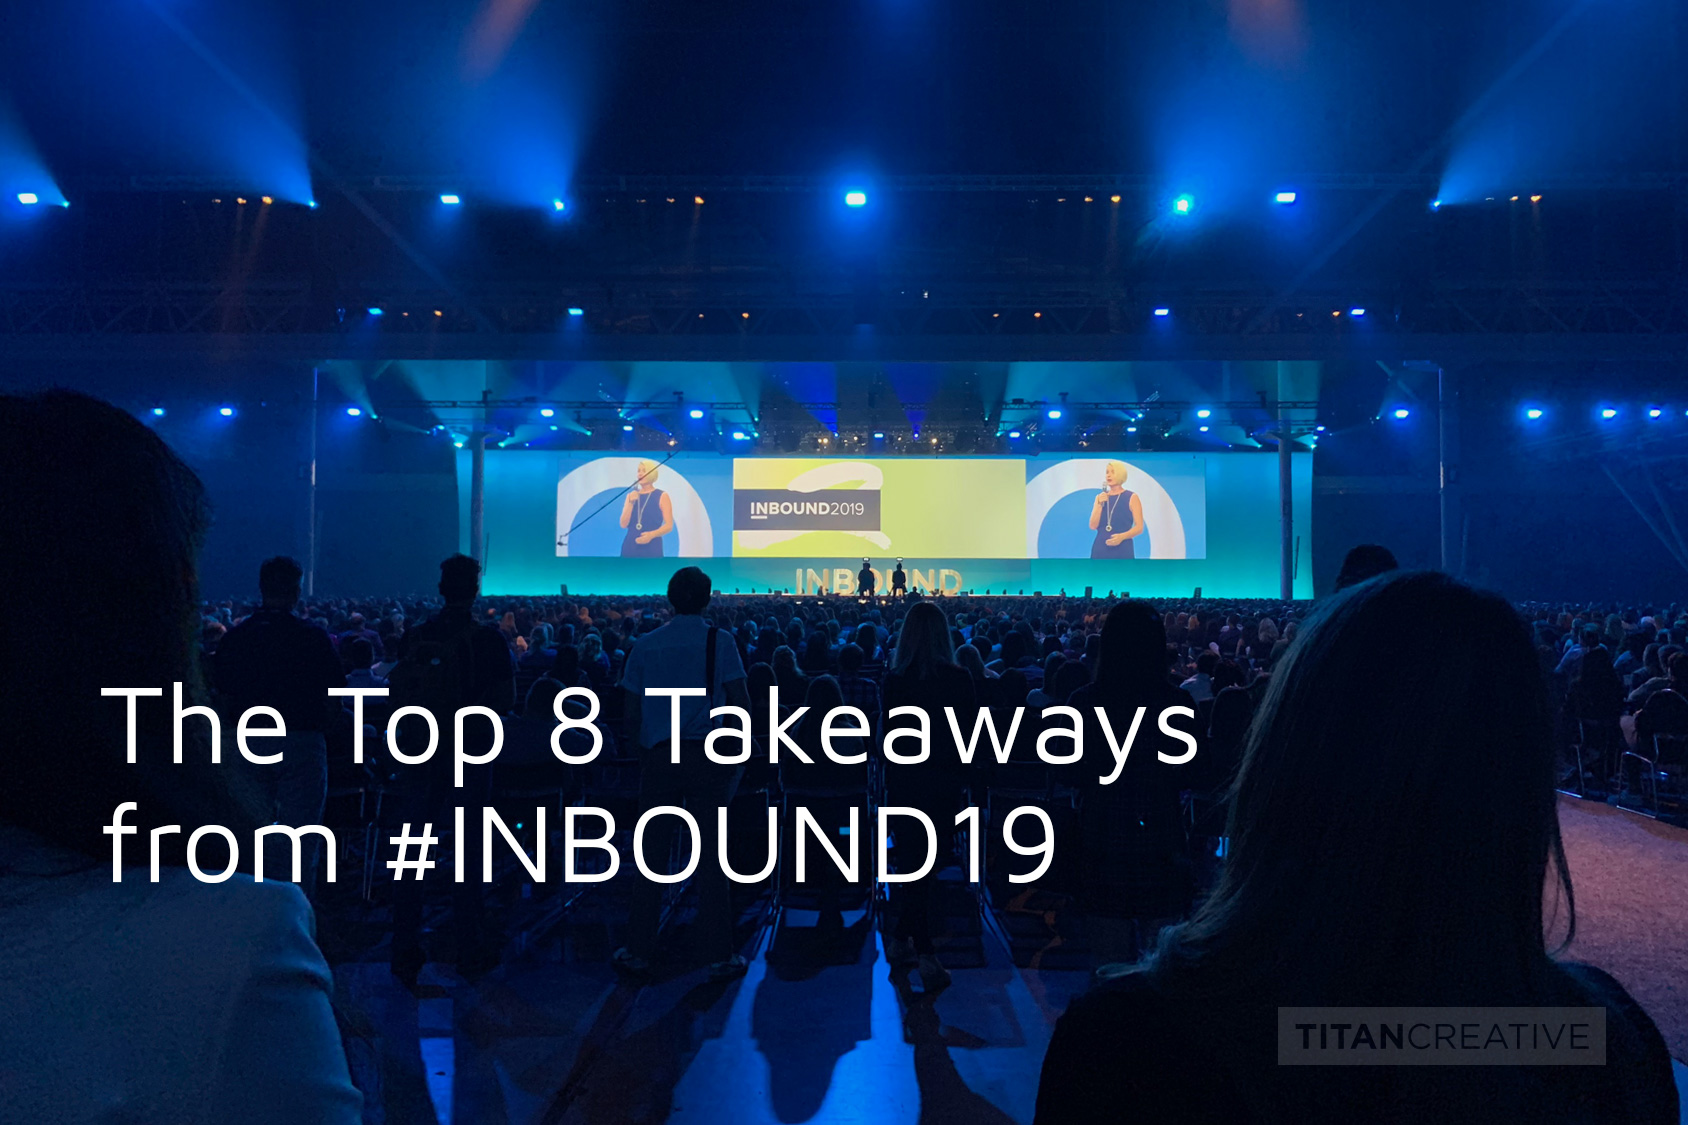 The Top 8 Takeaways from #INBOUND19